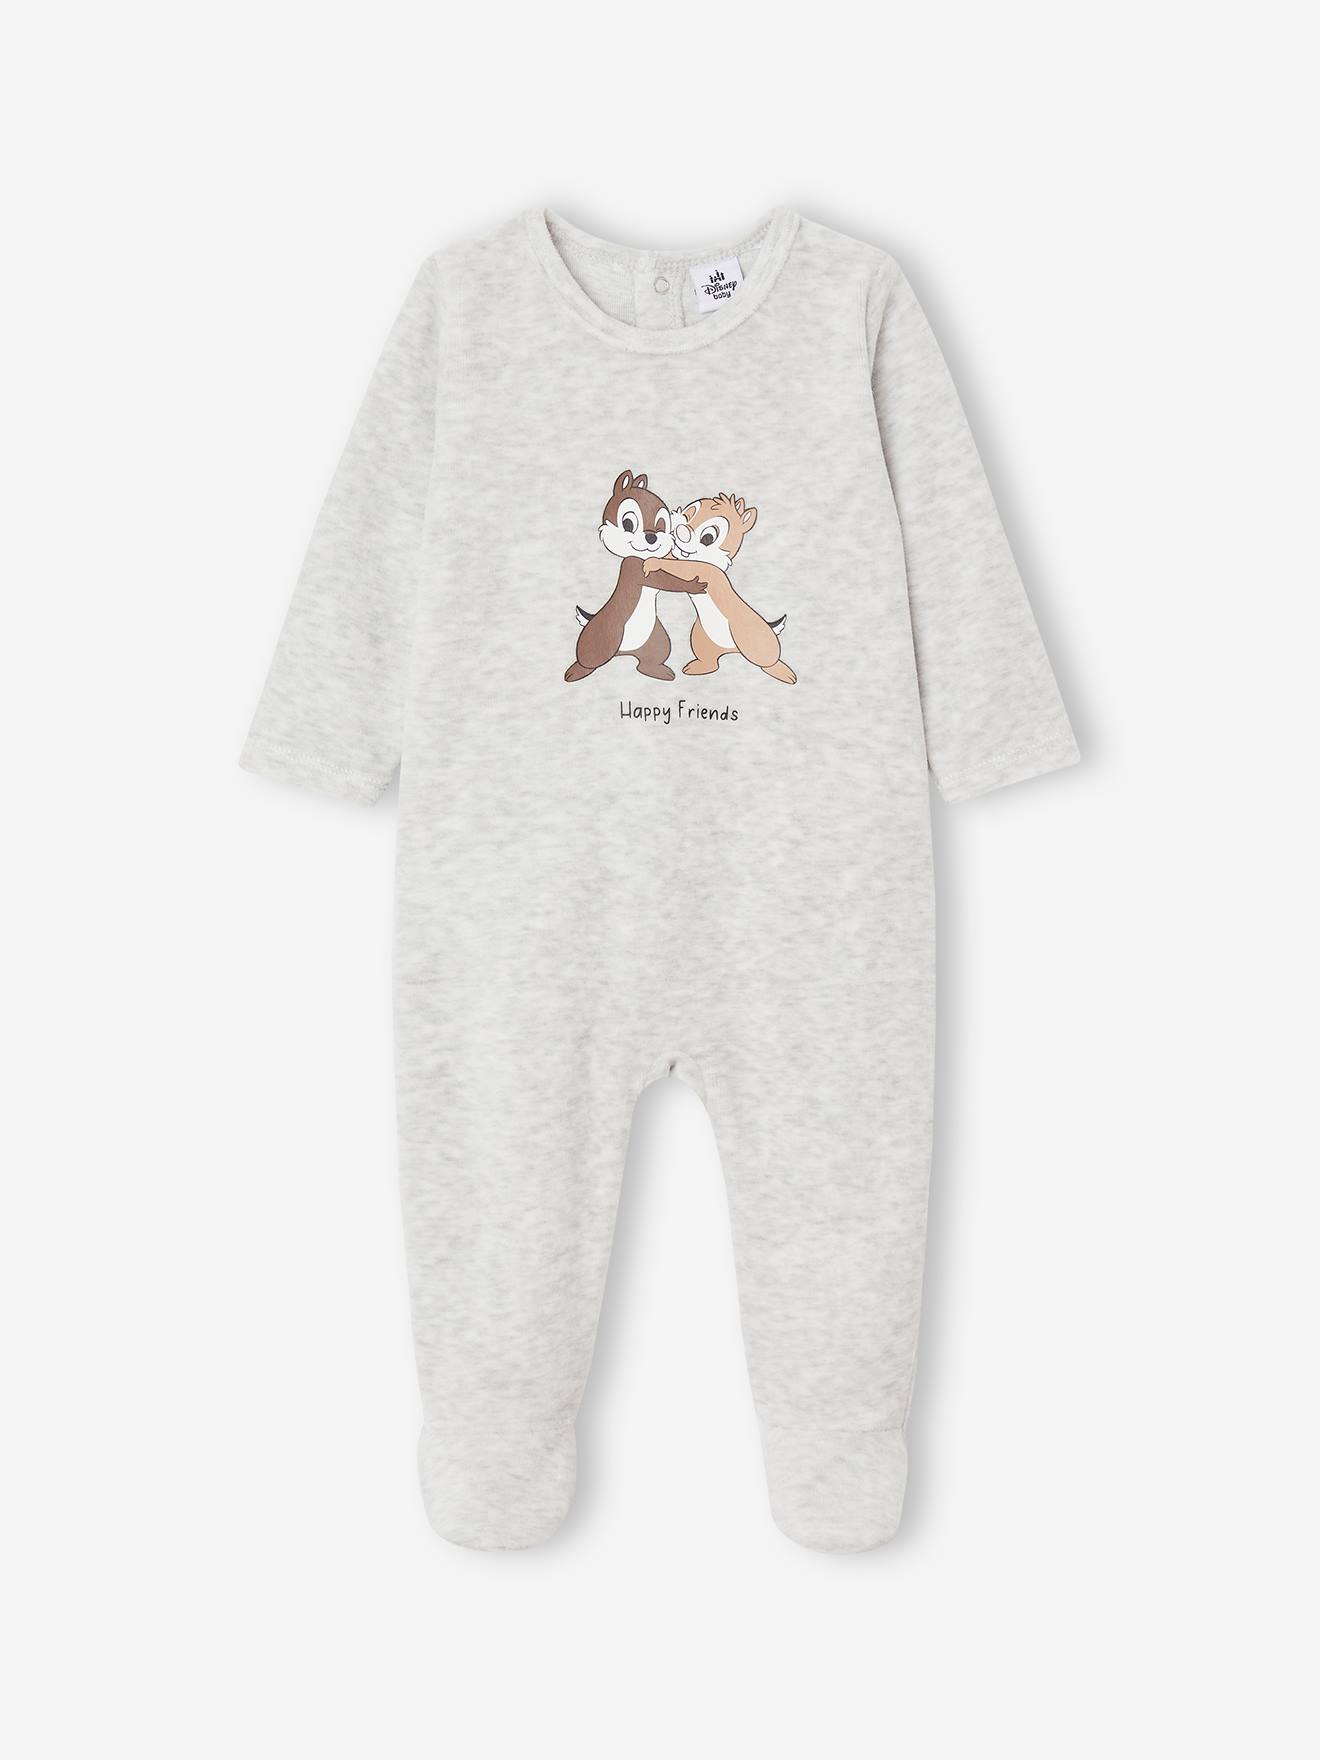 Chip’n Dale Velour Sleepsuit for Baby Boys by Disney(r) marl grey